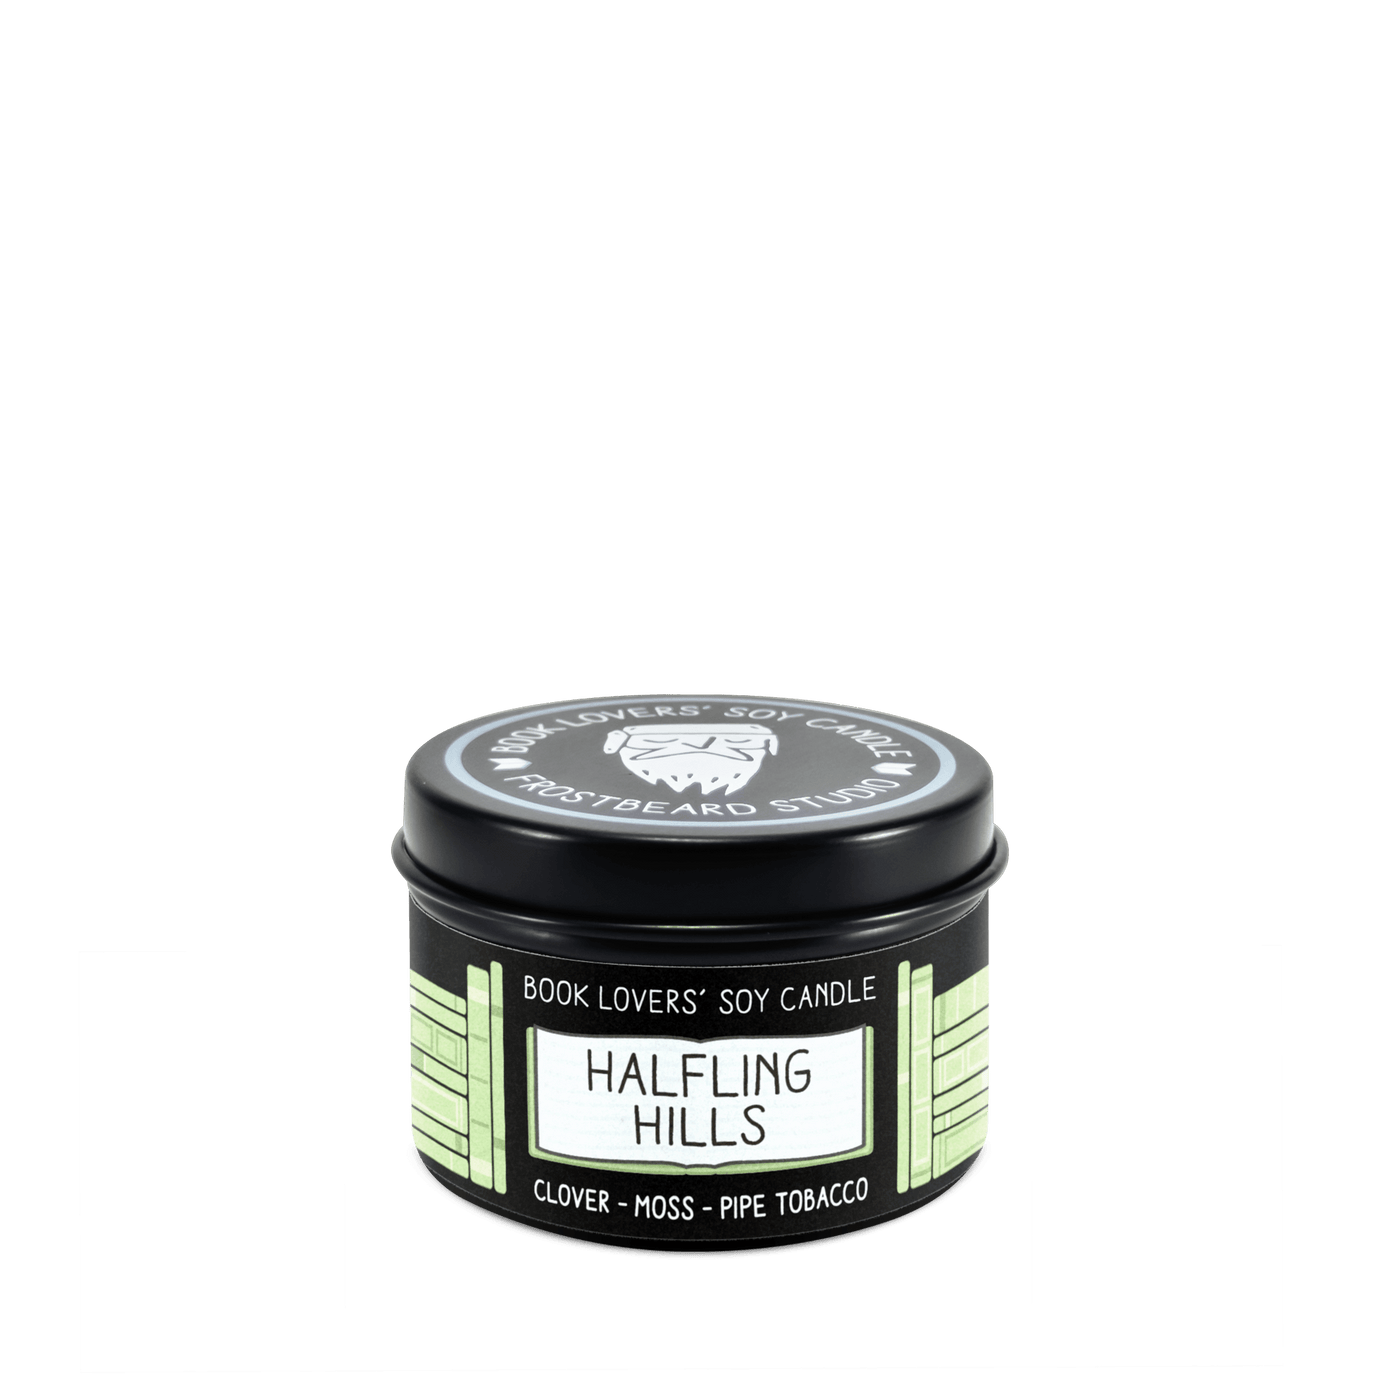 Halfling Hills  -  2 oz Tin  -  Book Lovers' Soy Candle  -  Frostbeard Studio